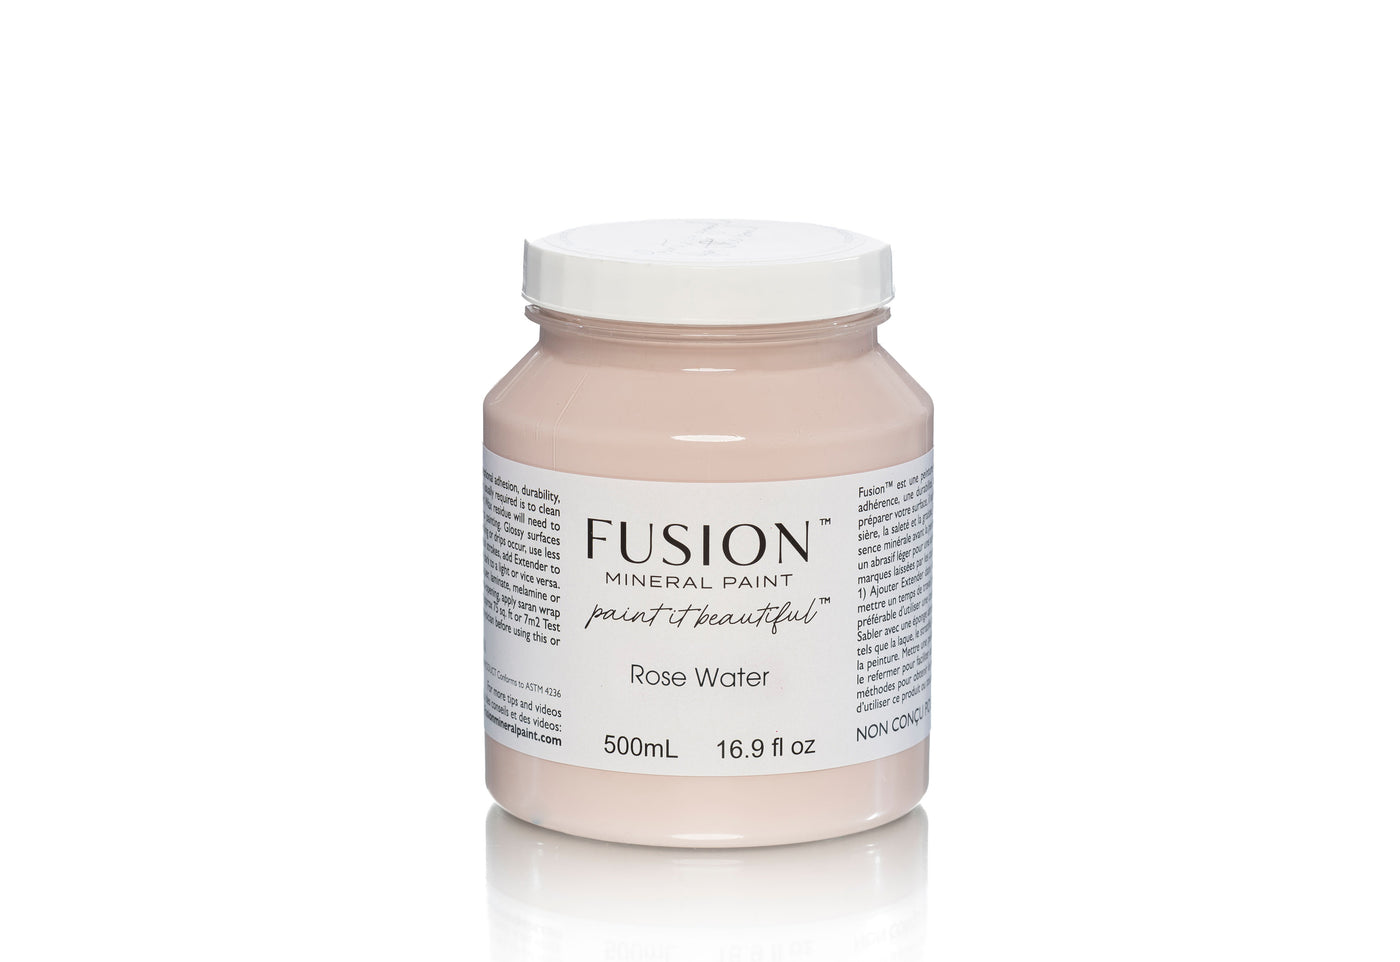 Neutral pink 500 ml pint from Fusion Mineral Paint